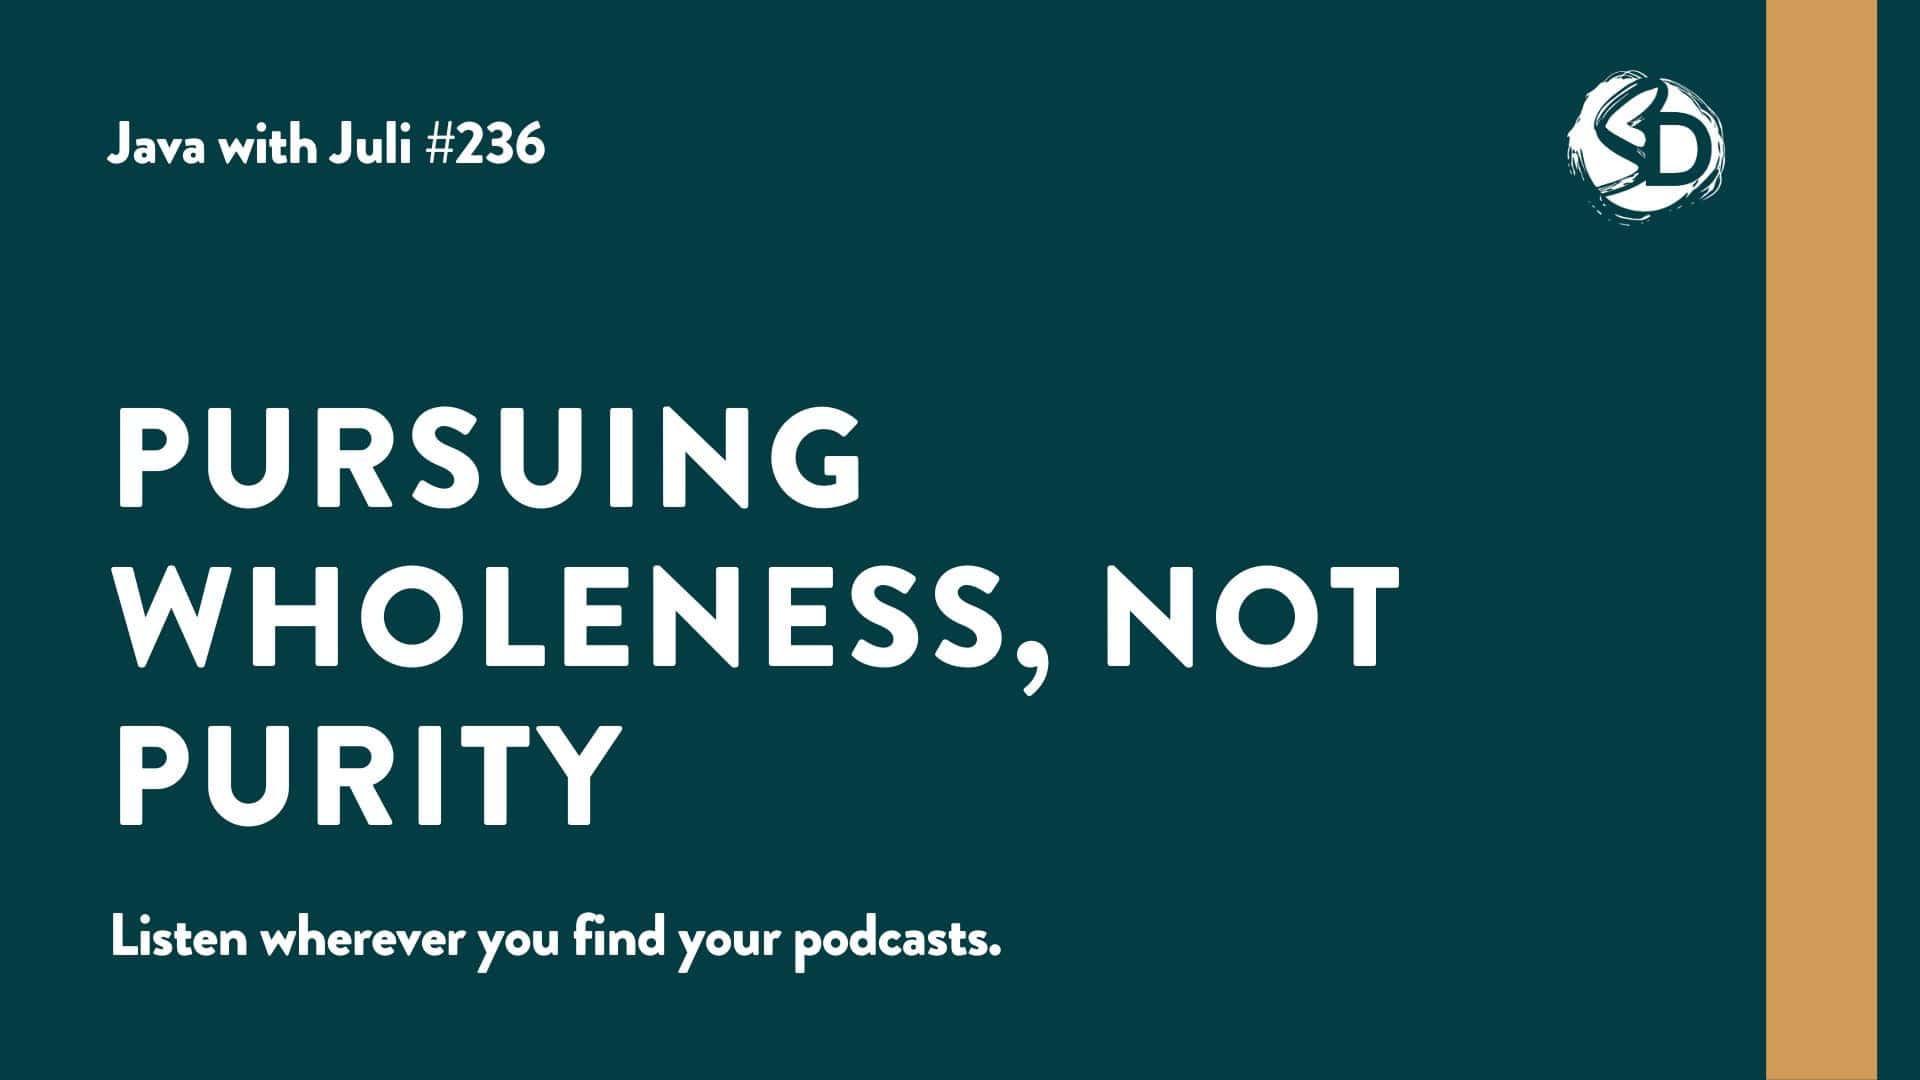 #236: Pursuing Wholeness, Not Purity